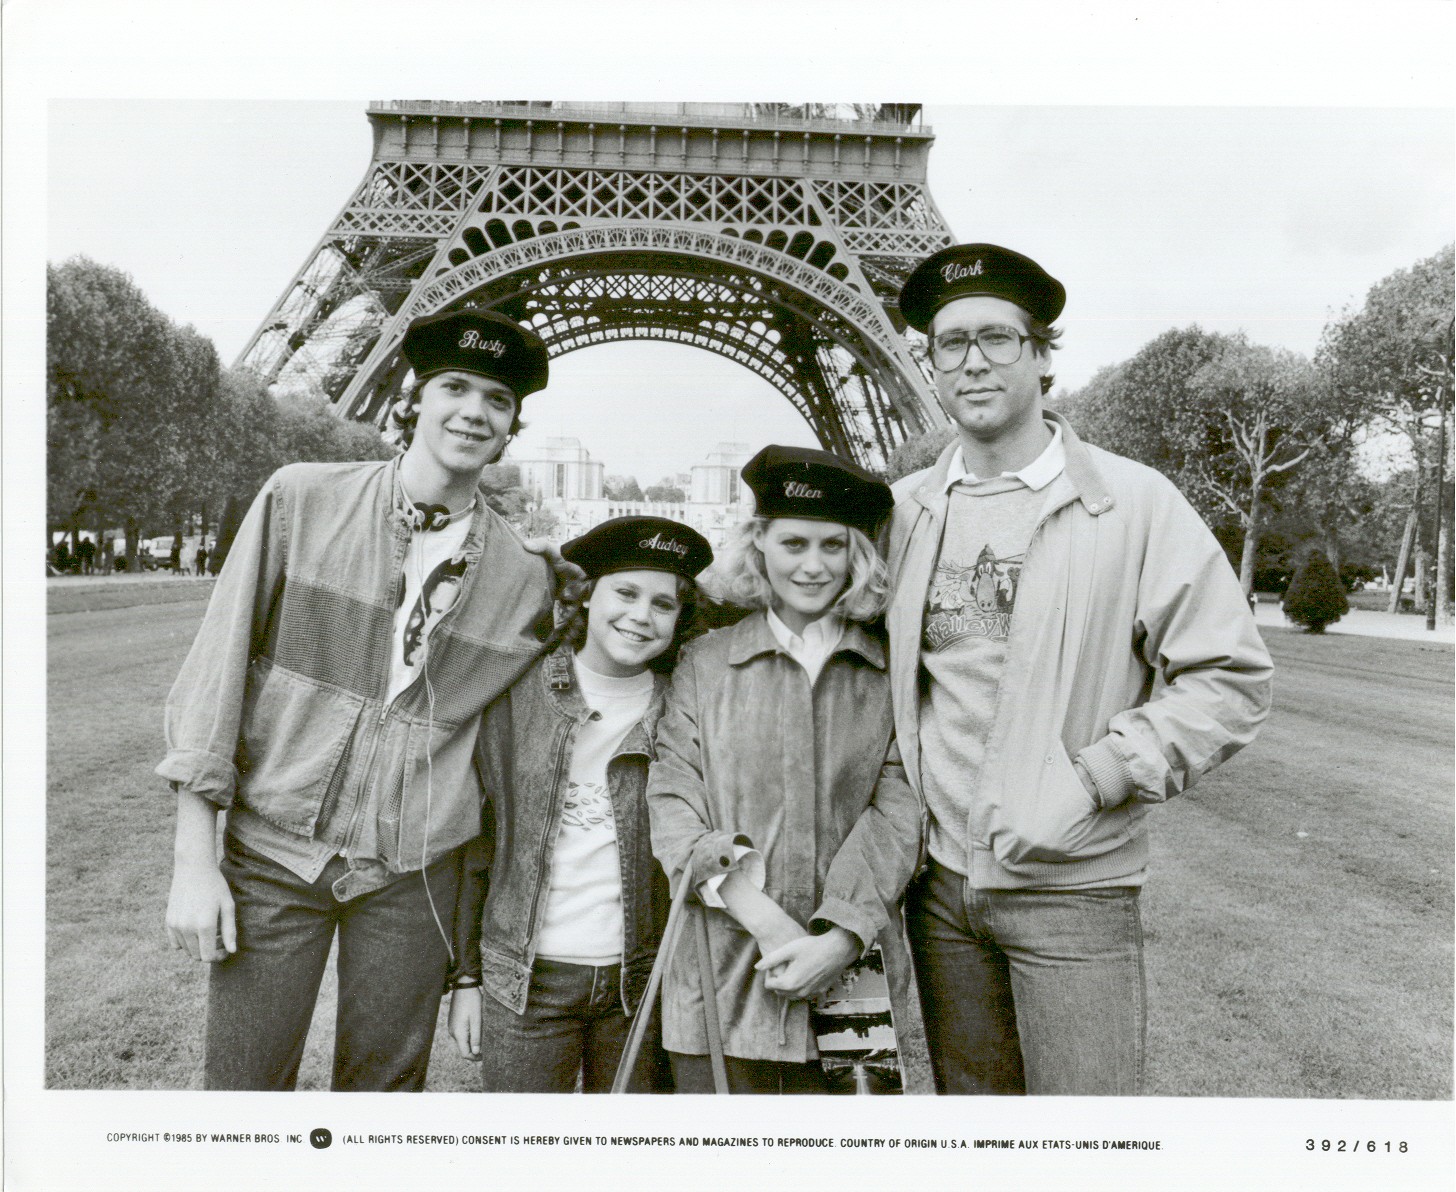 Griswold family in front of Eiffel Tower, 1985.